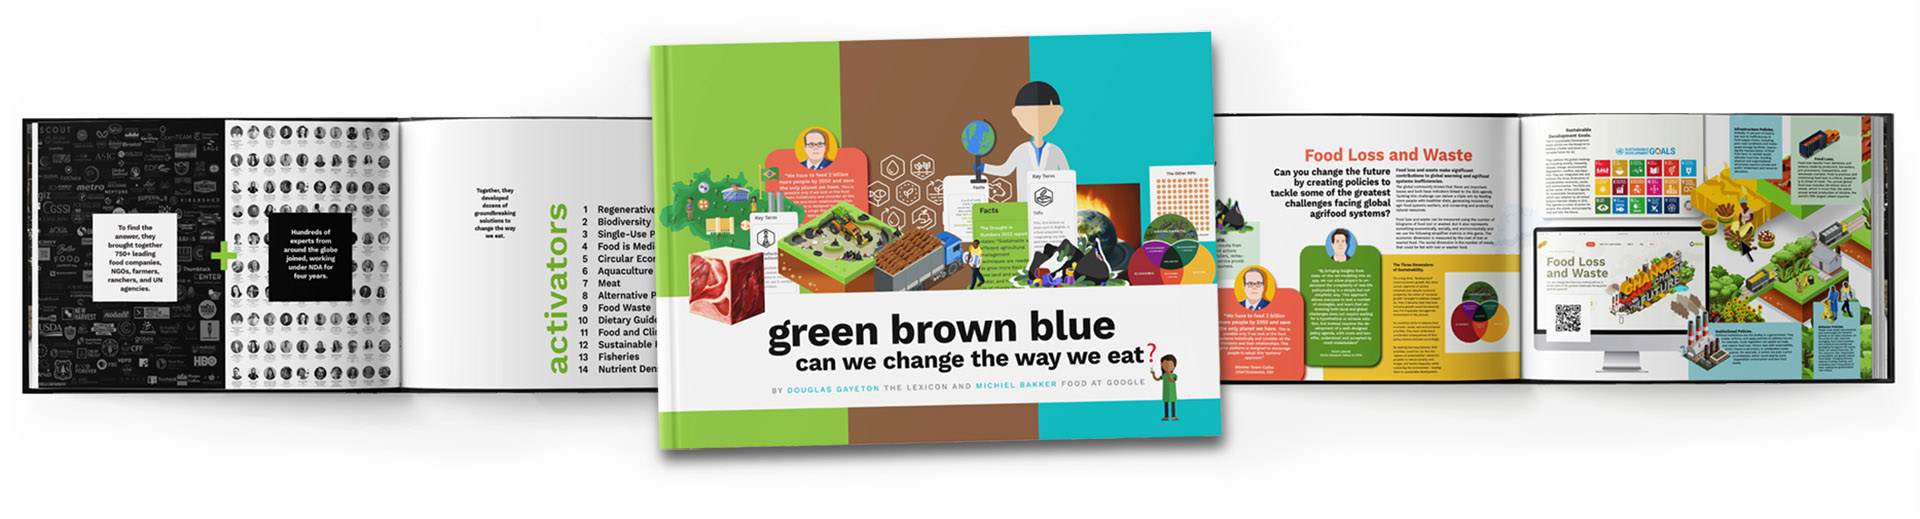 image of Green Brown Blue book design